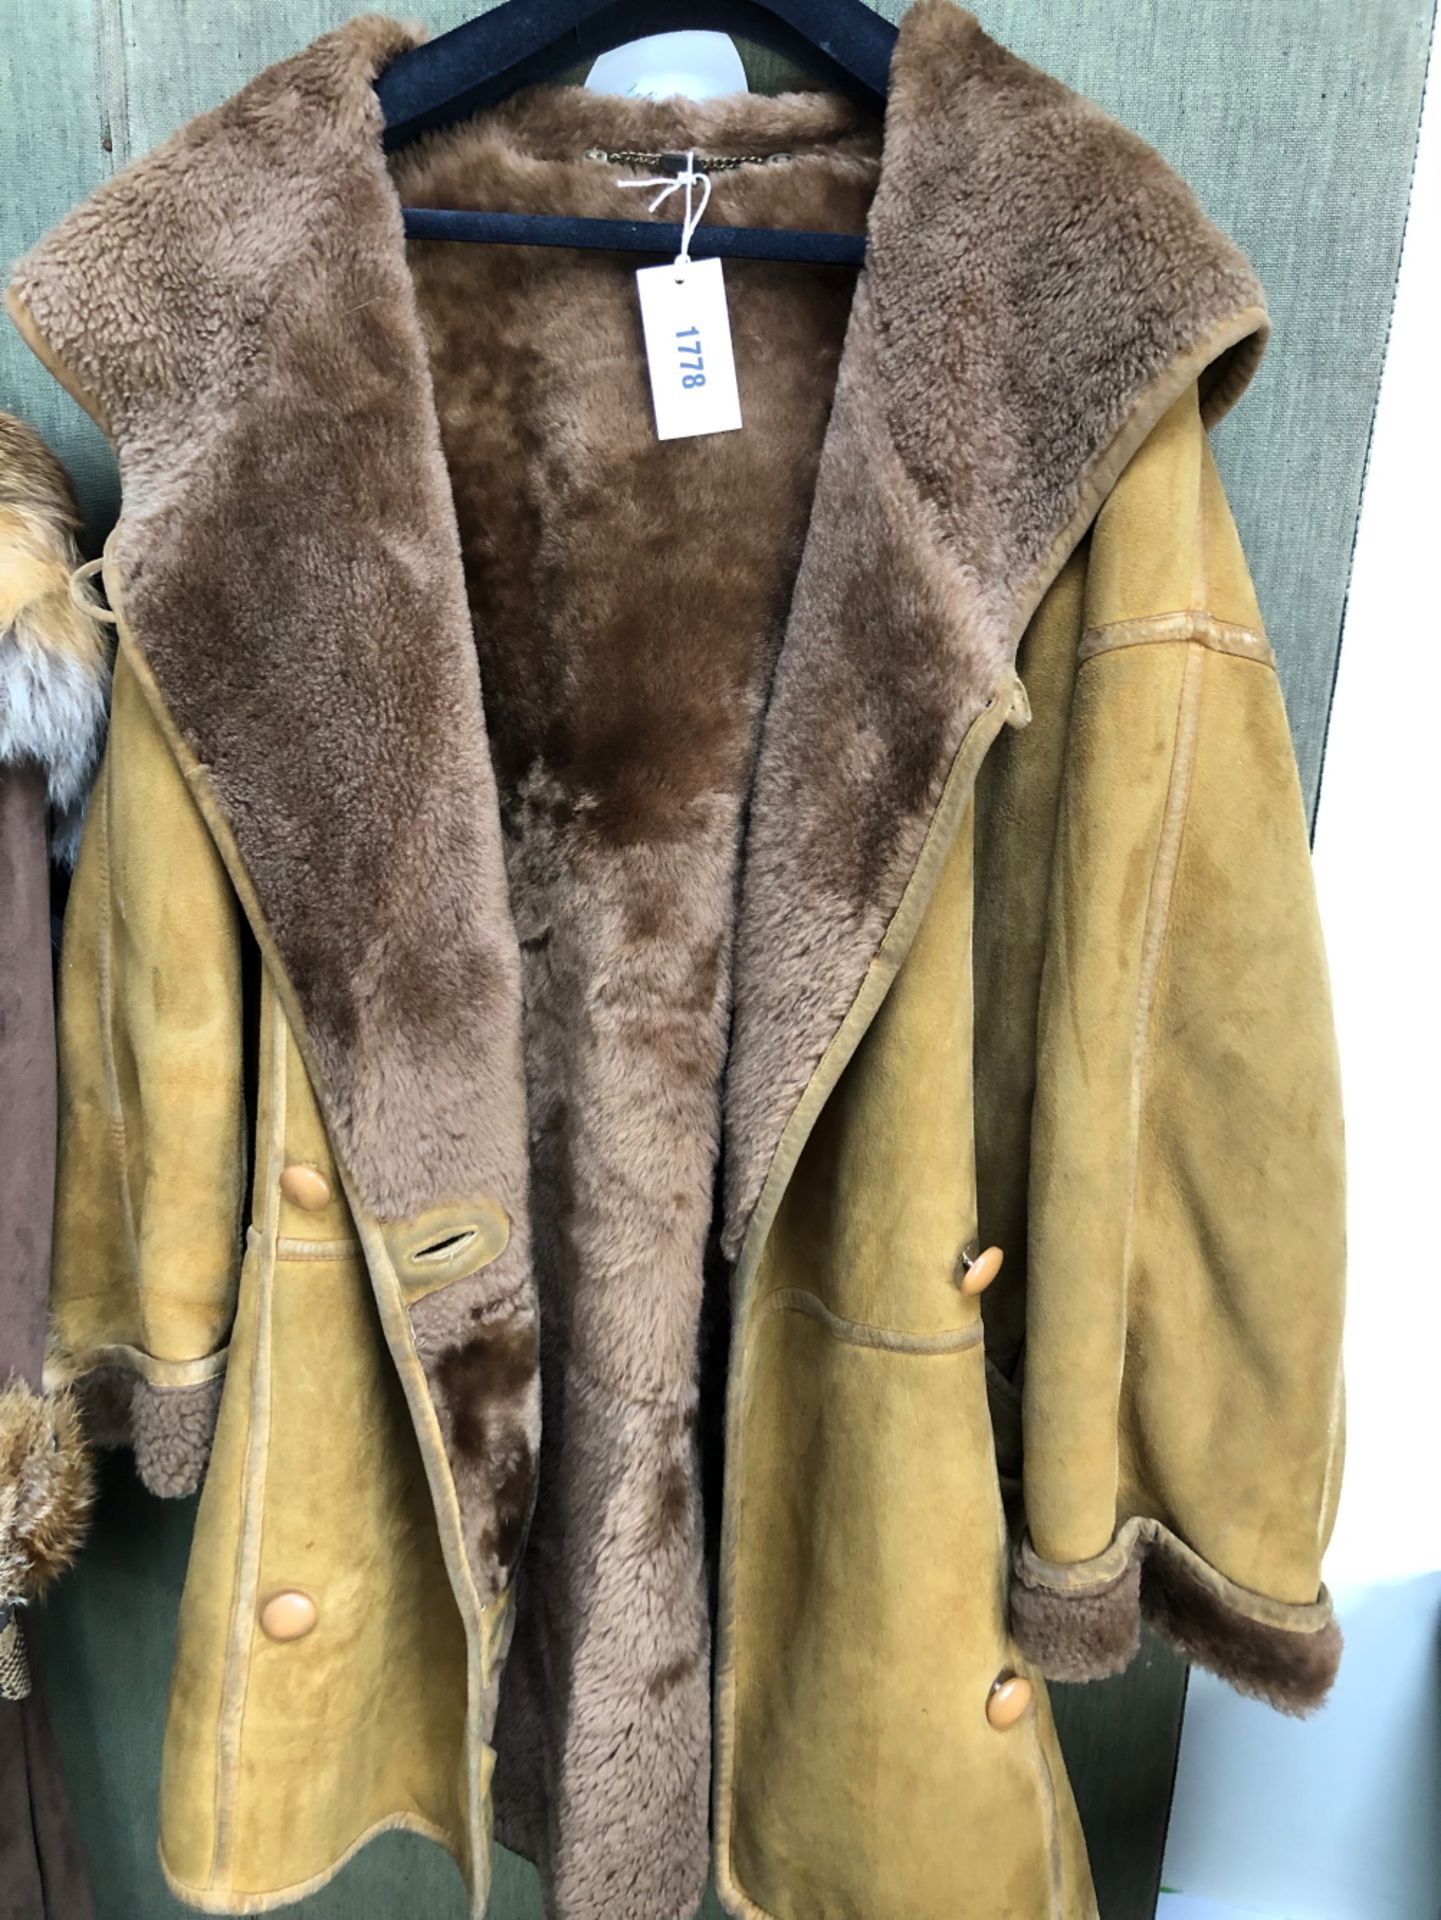 JACKETS: STRIWA 3/4 LENGTH FAWN COLOURED SHEEP SKIN JACKET WITH HOOD SIZE STATED EUR 36, TOGETHER - Bild 14 aus 21